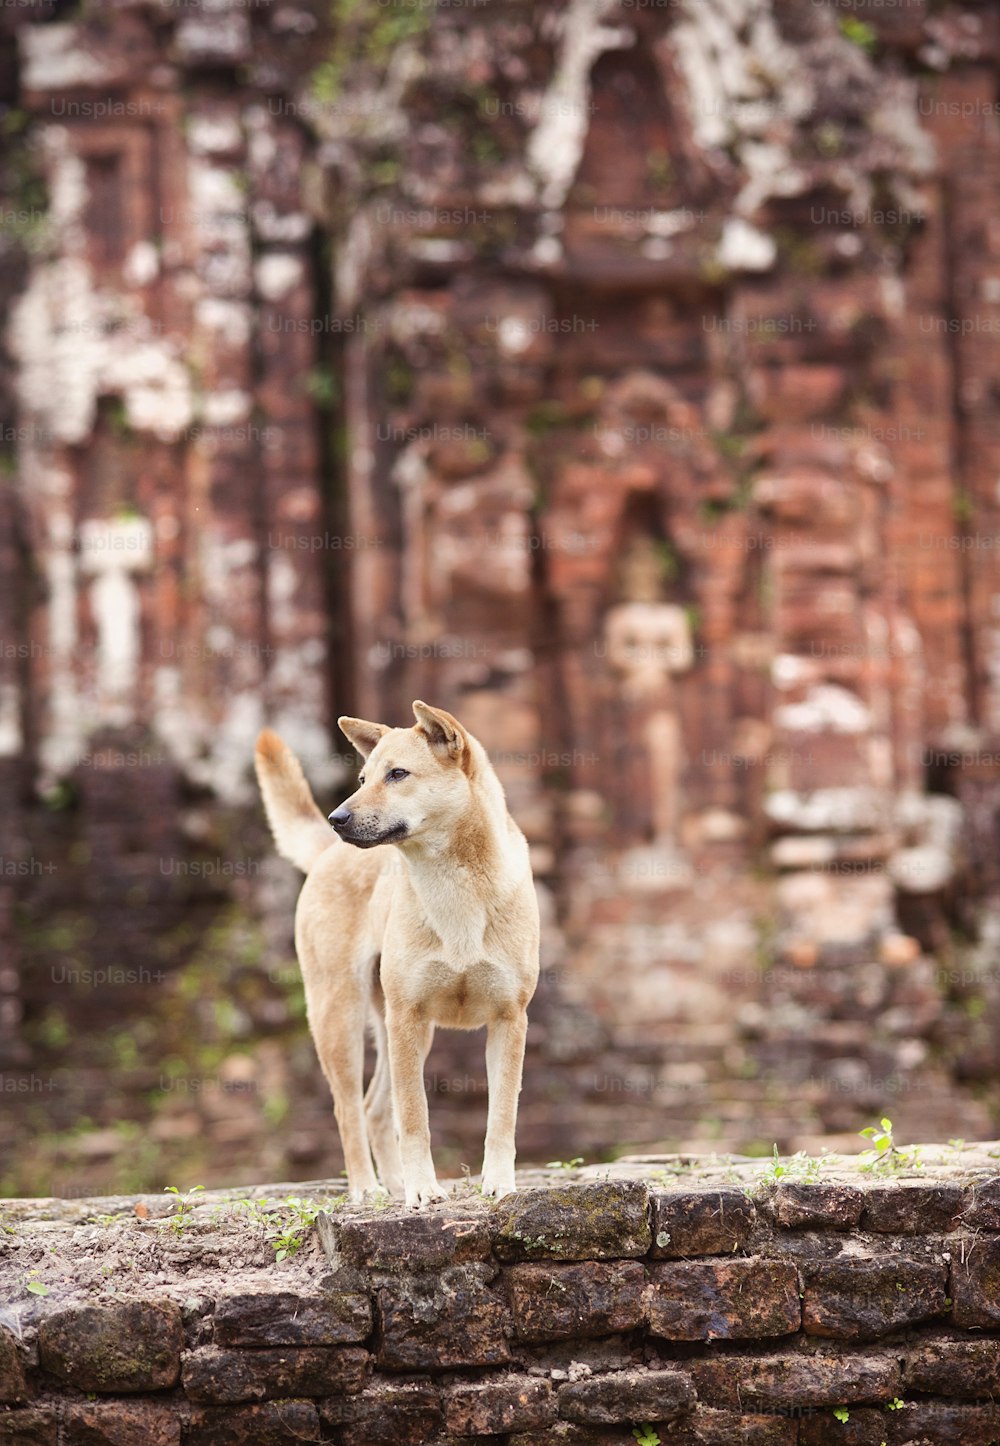 Dog standing outside the temple in Vietnam